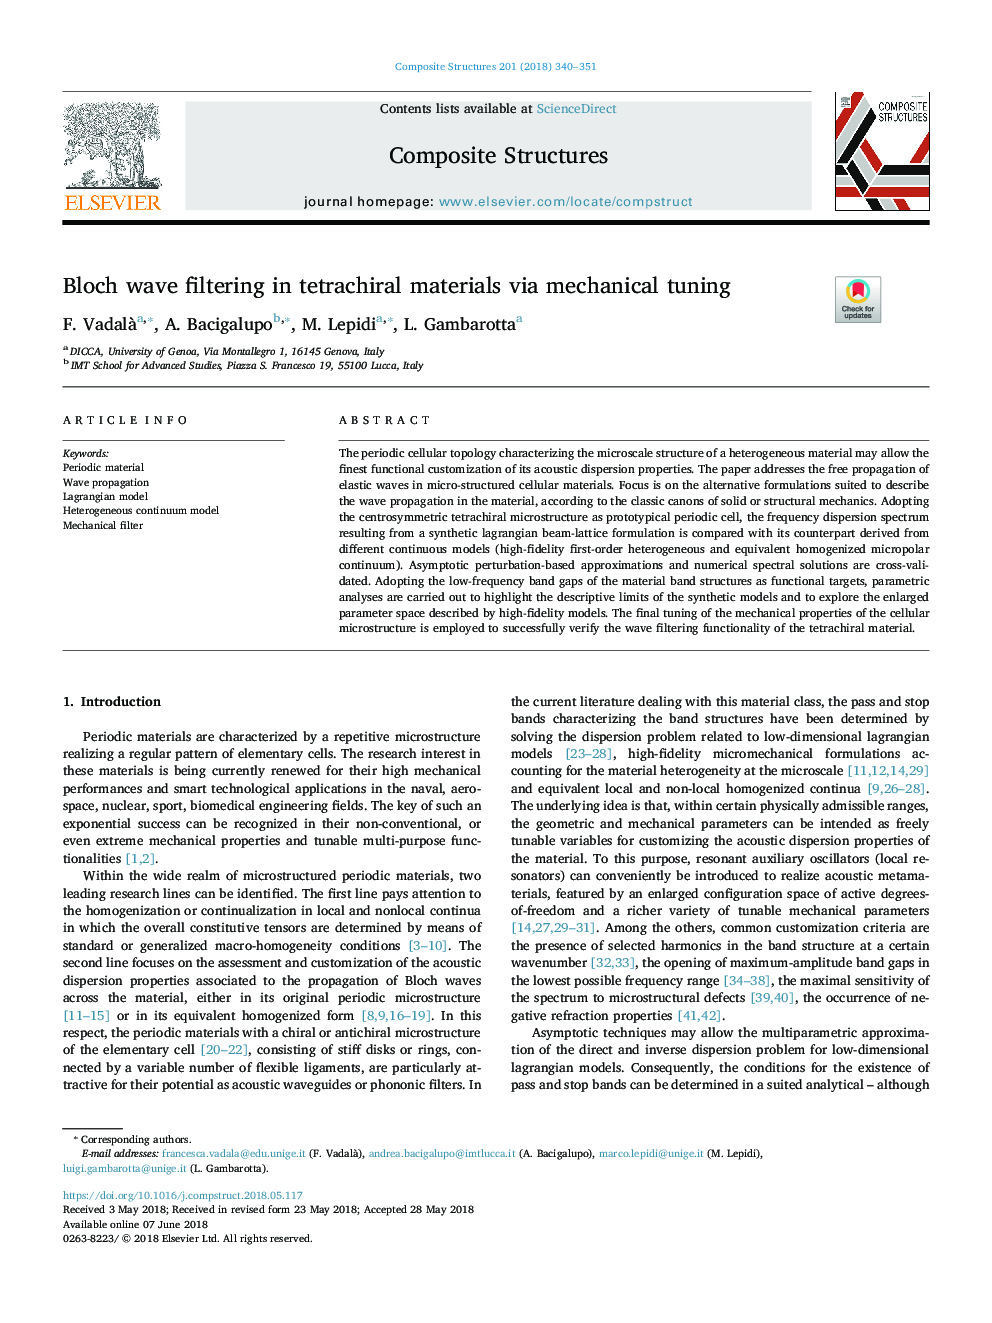 Bloch wave filtering in tetrachiral materials via mechanical tuning